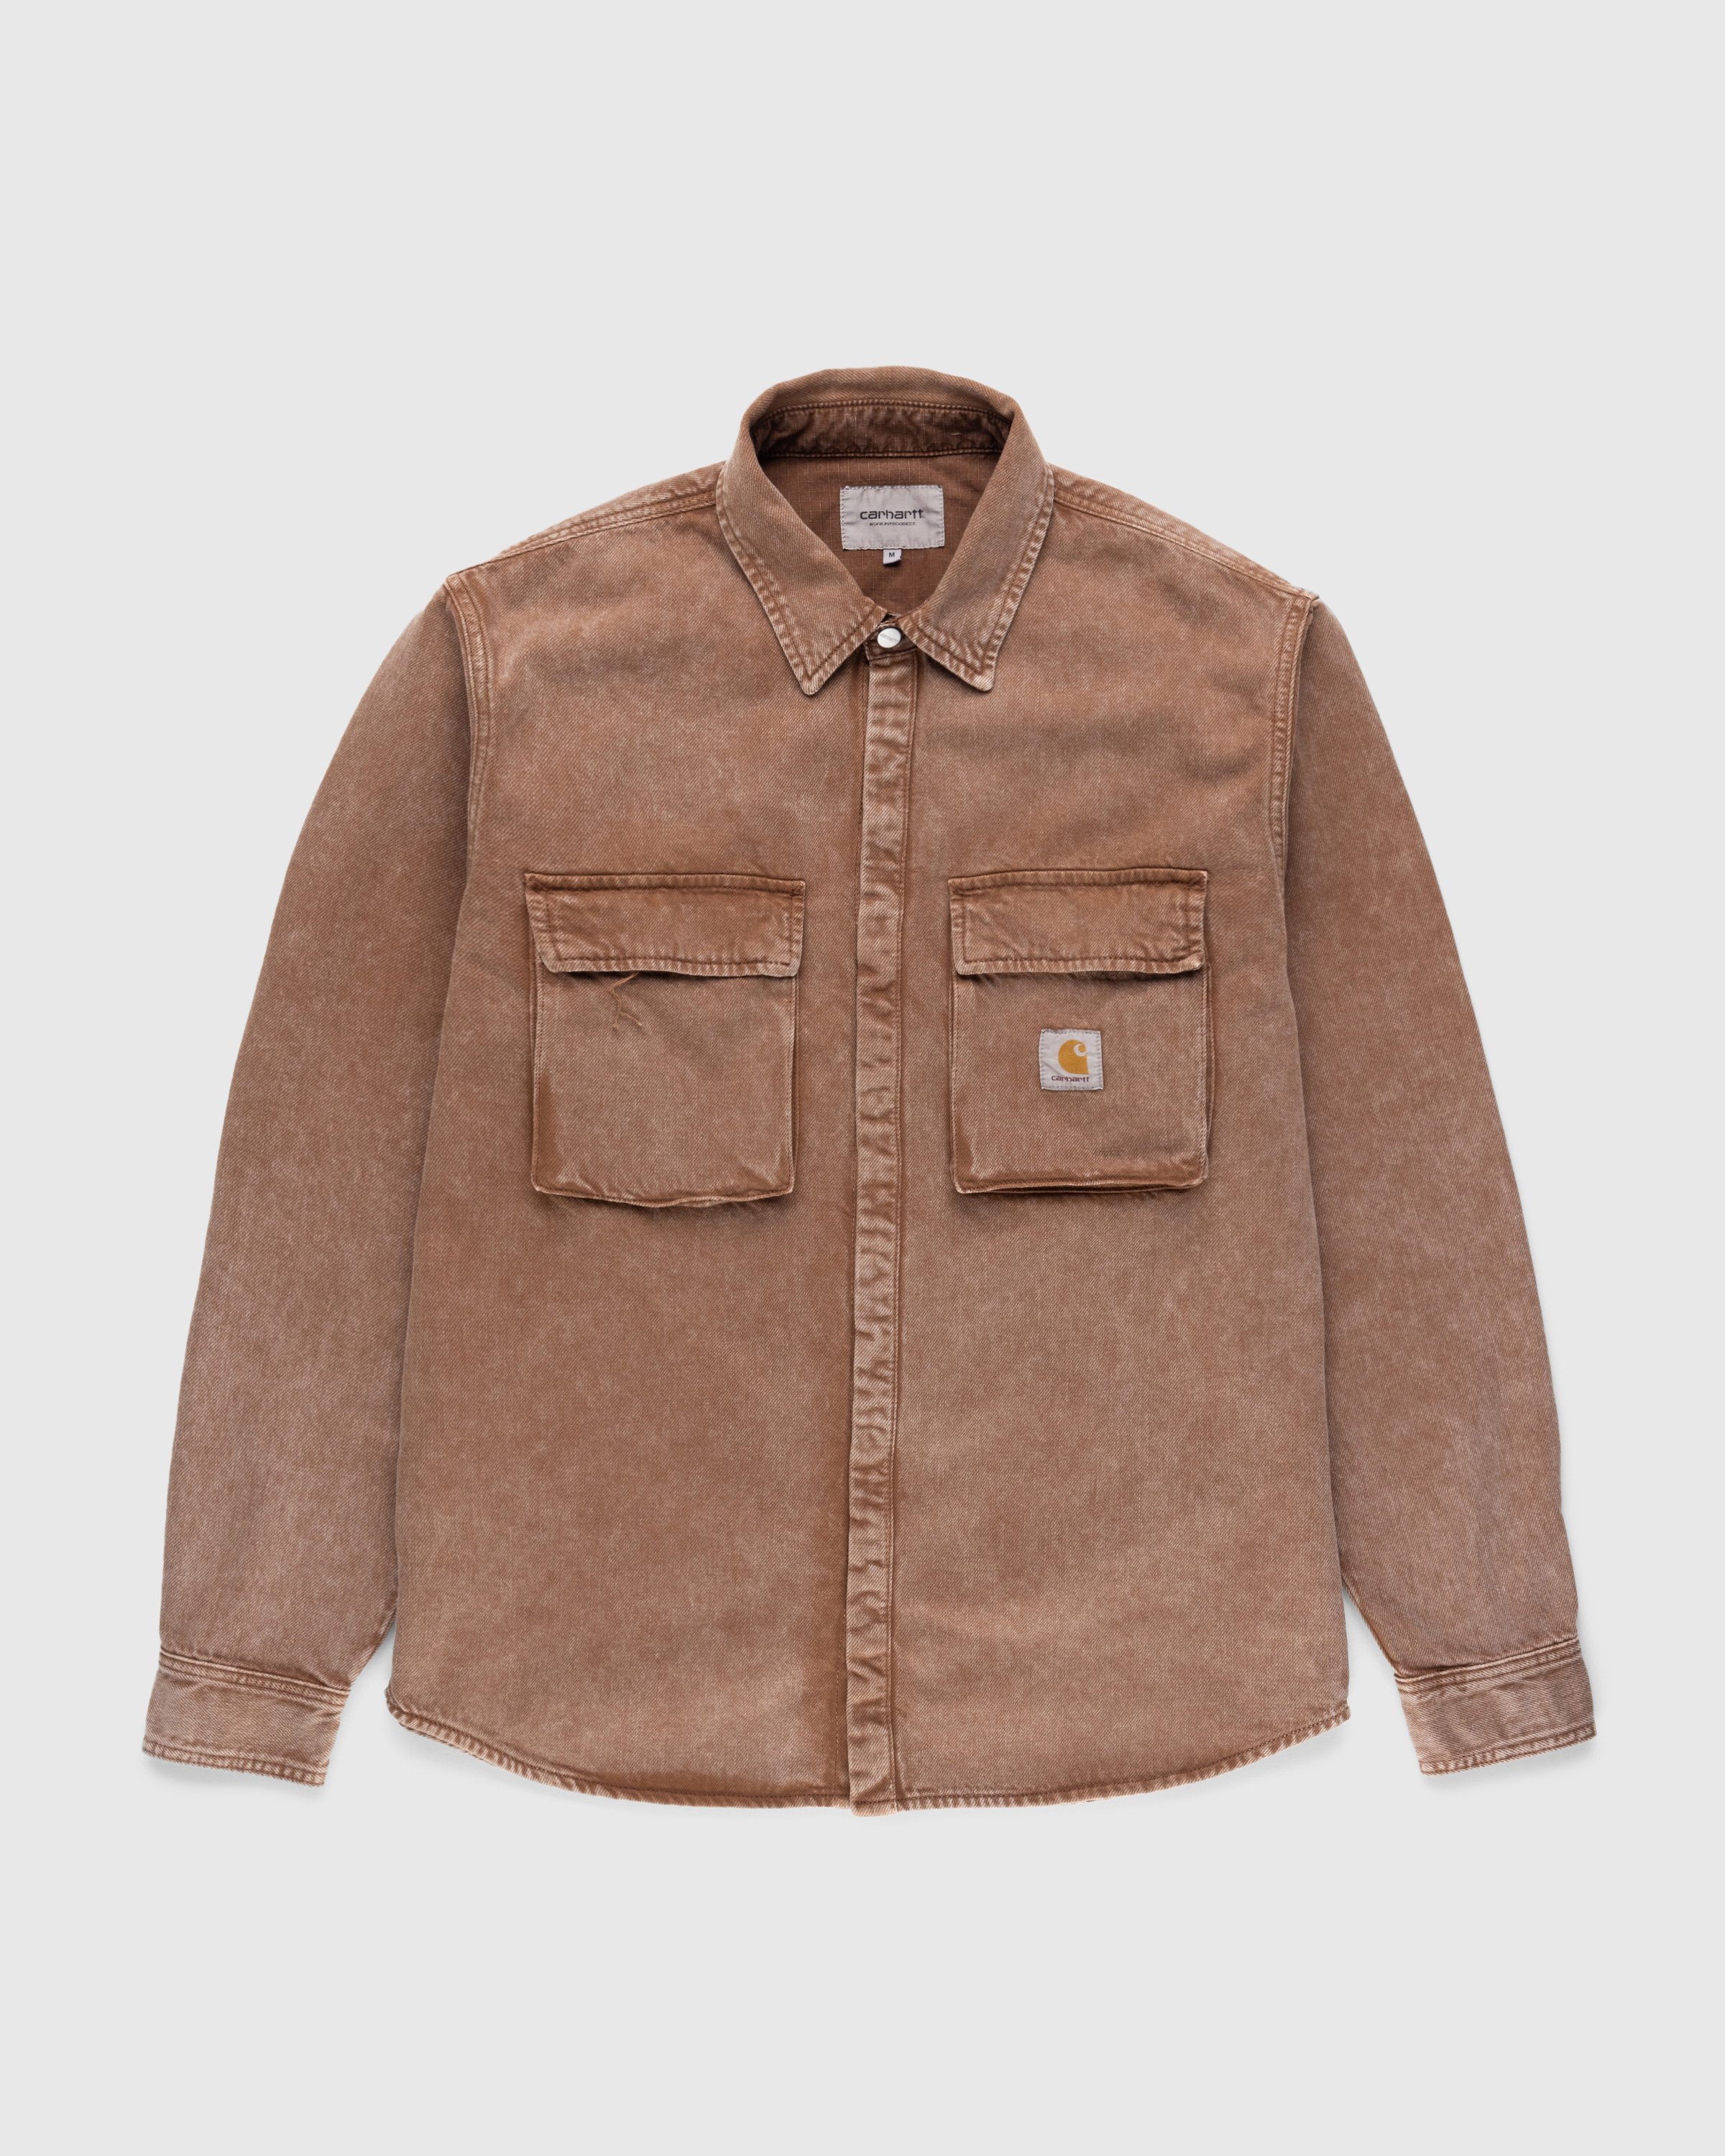 Carhartt WIP - Monterey Shirt Jacket Worn-Washed Red - Clothing - Red - Image 1